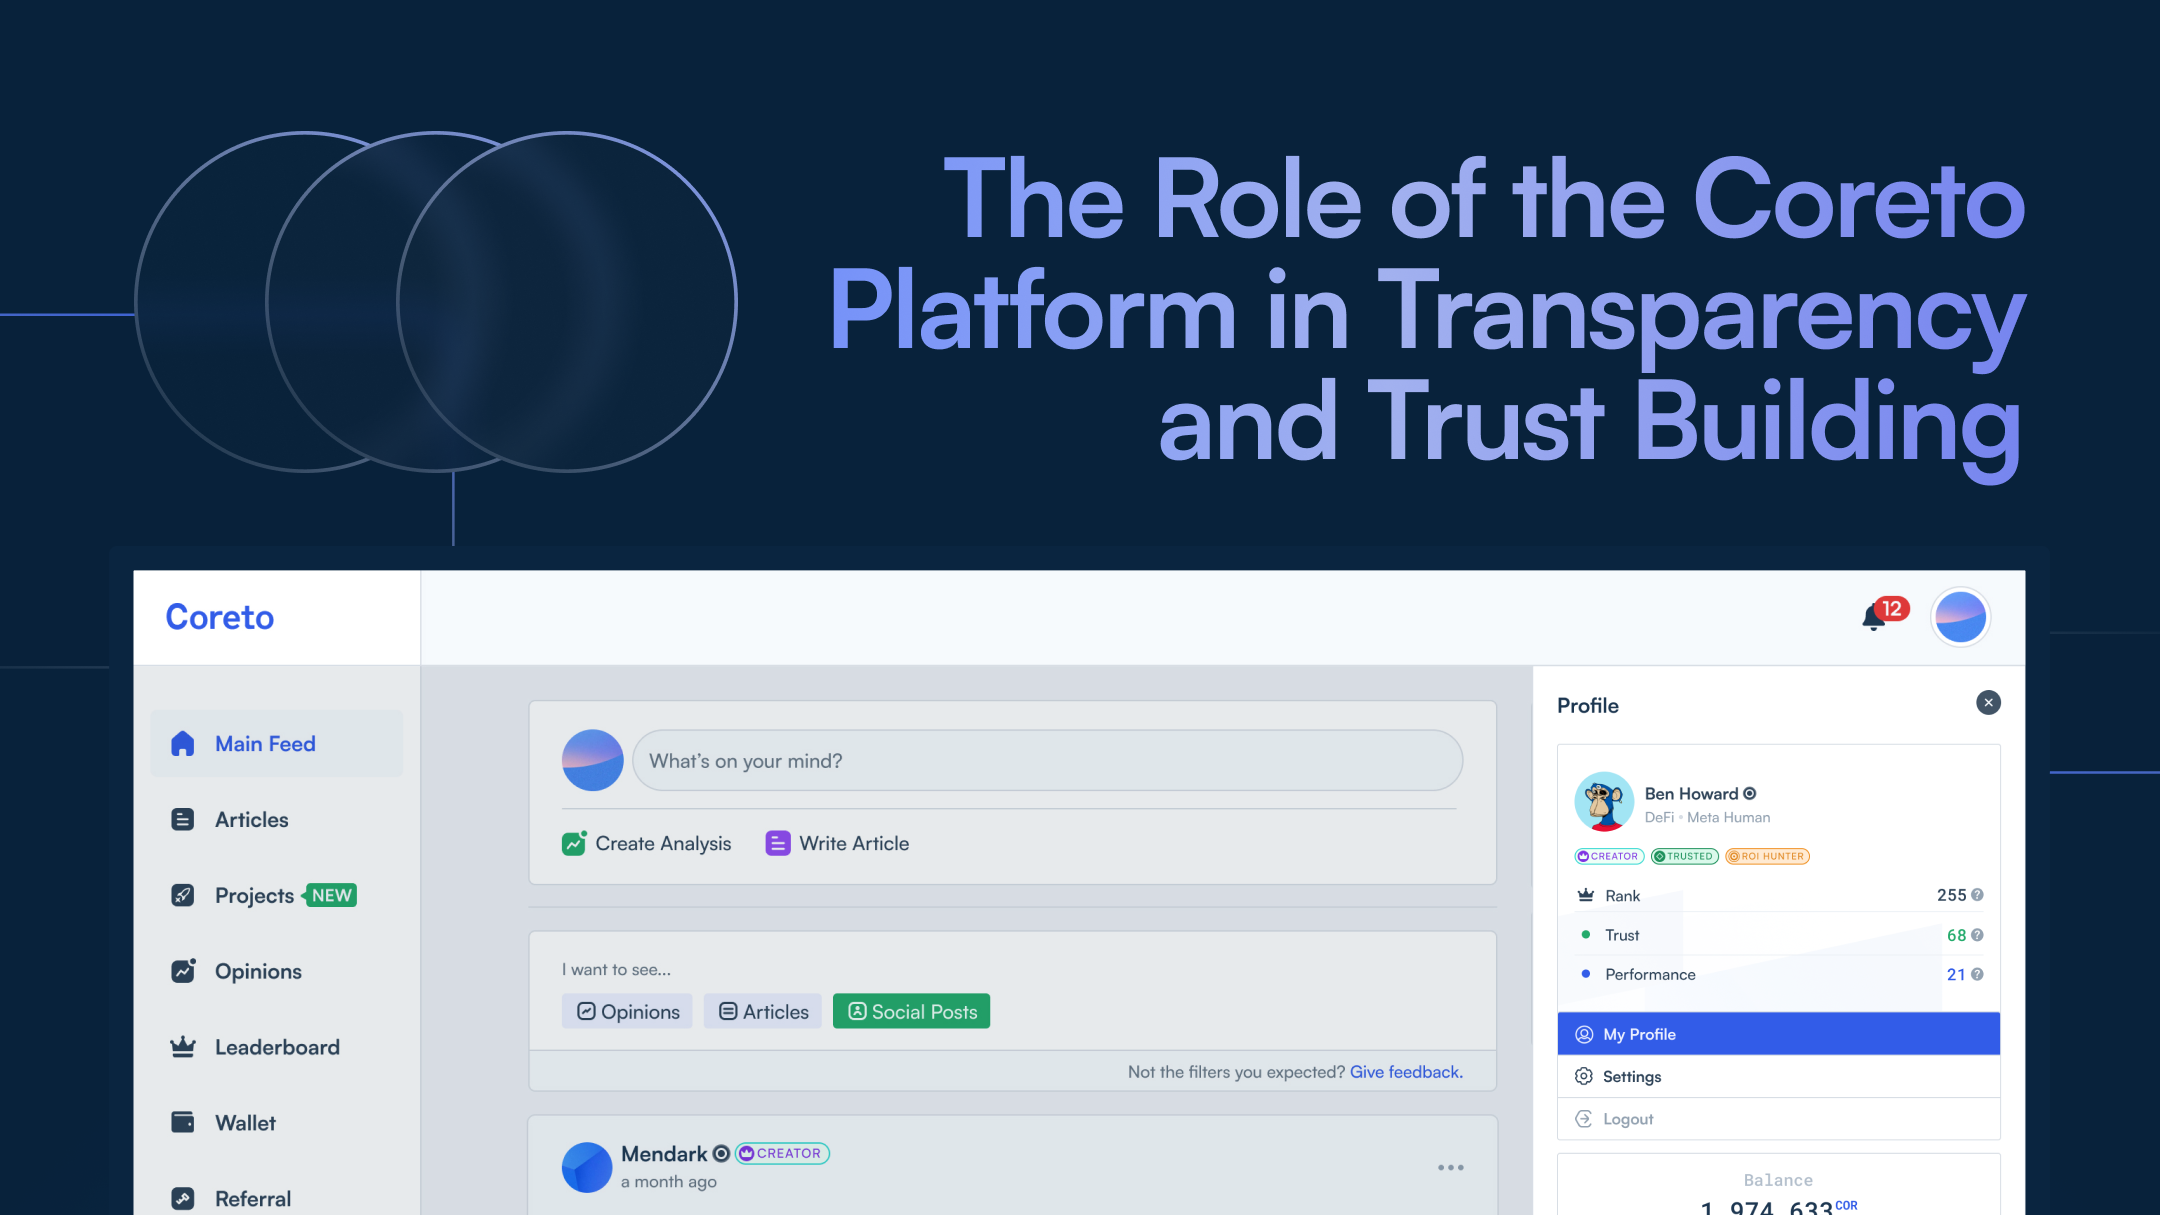 The Role of the Coreto Platform in Transparency and Trust Building